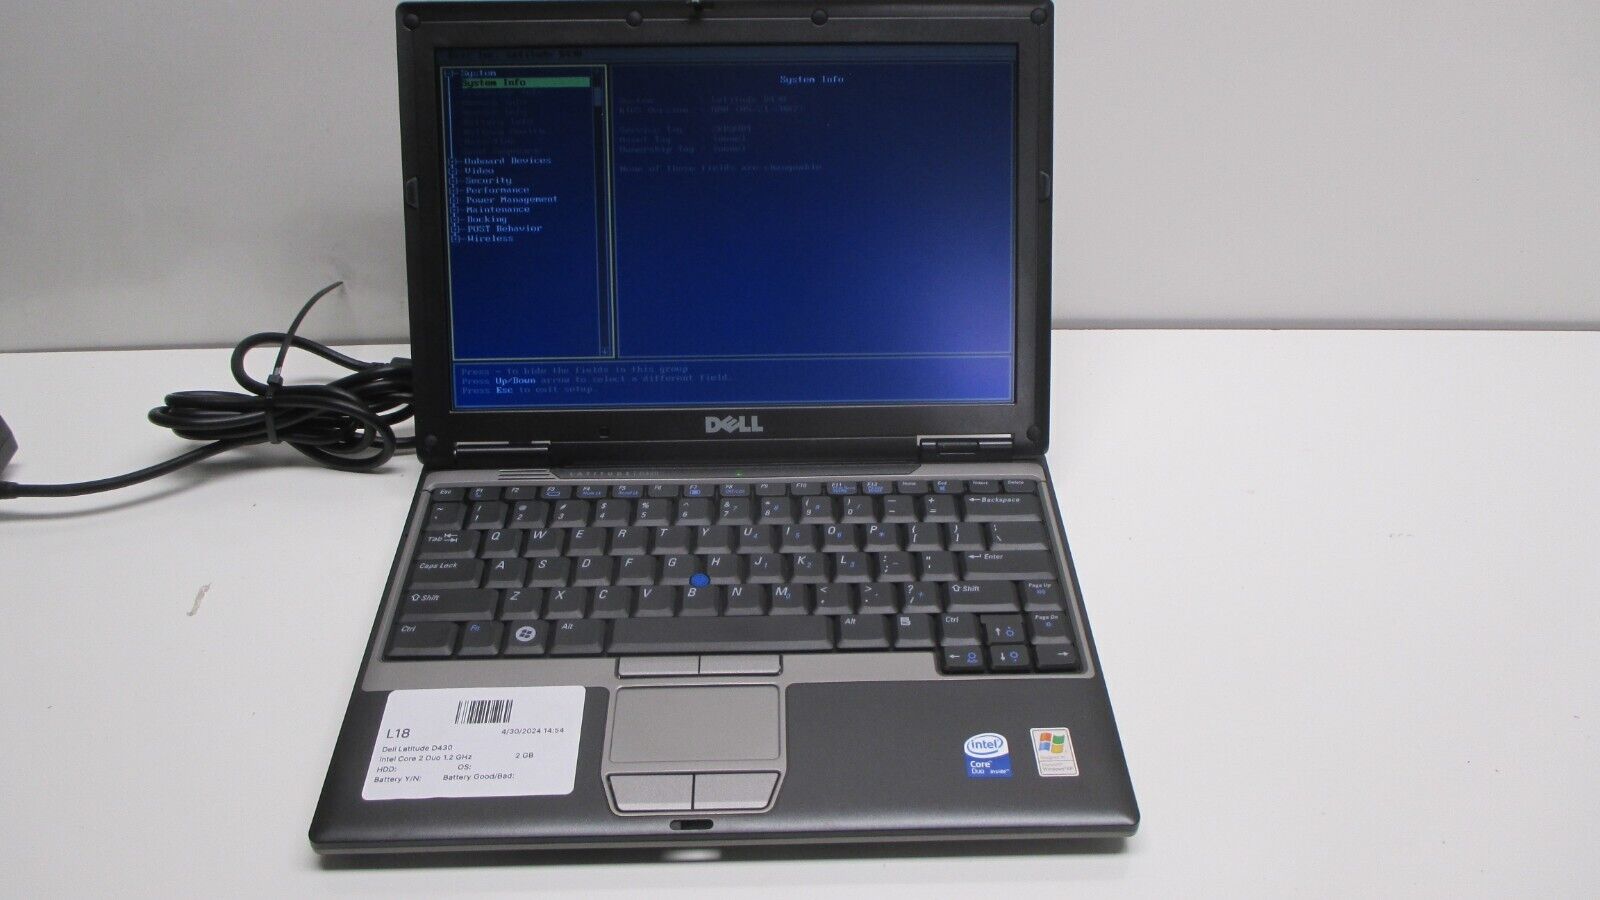 Dell Latitude D430 Laptop Intel Core 2 Duo 2GB Ram No HDD/Battery/HDD Cable